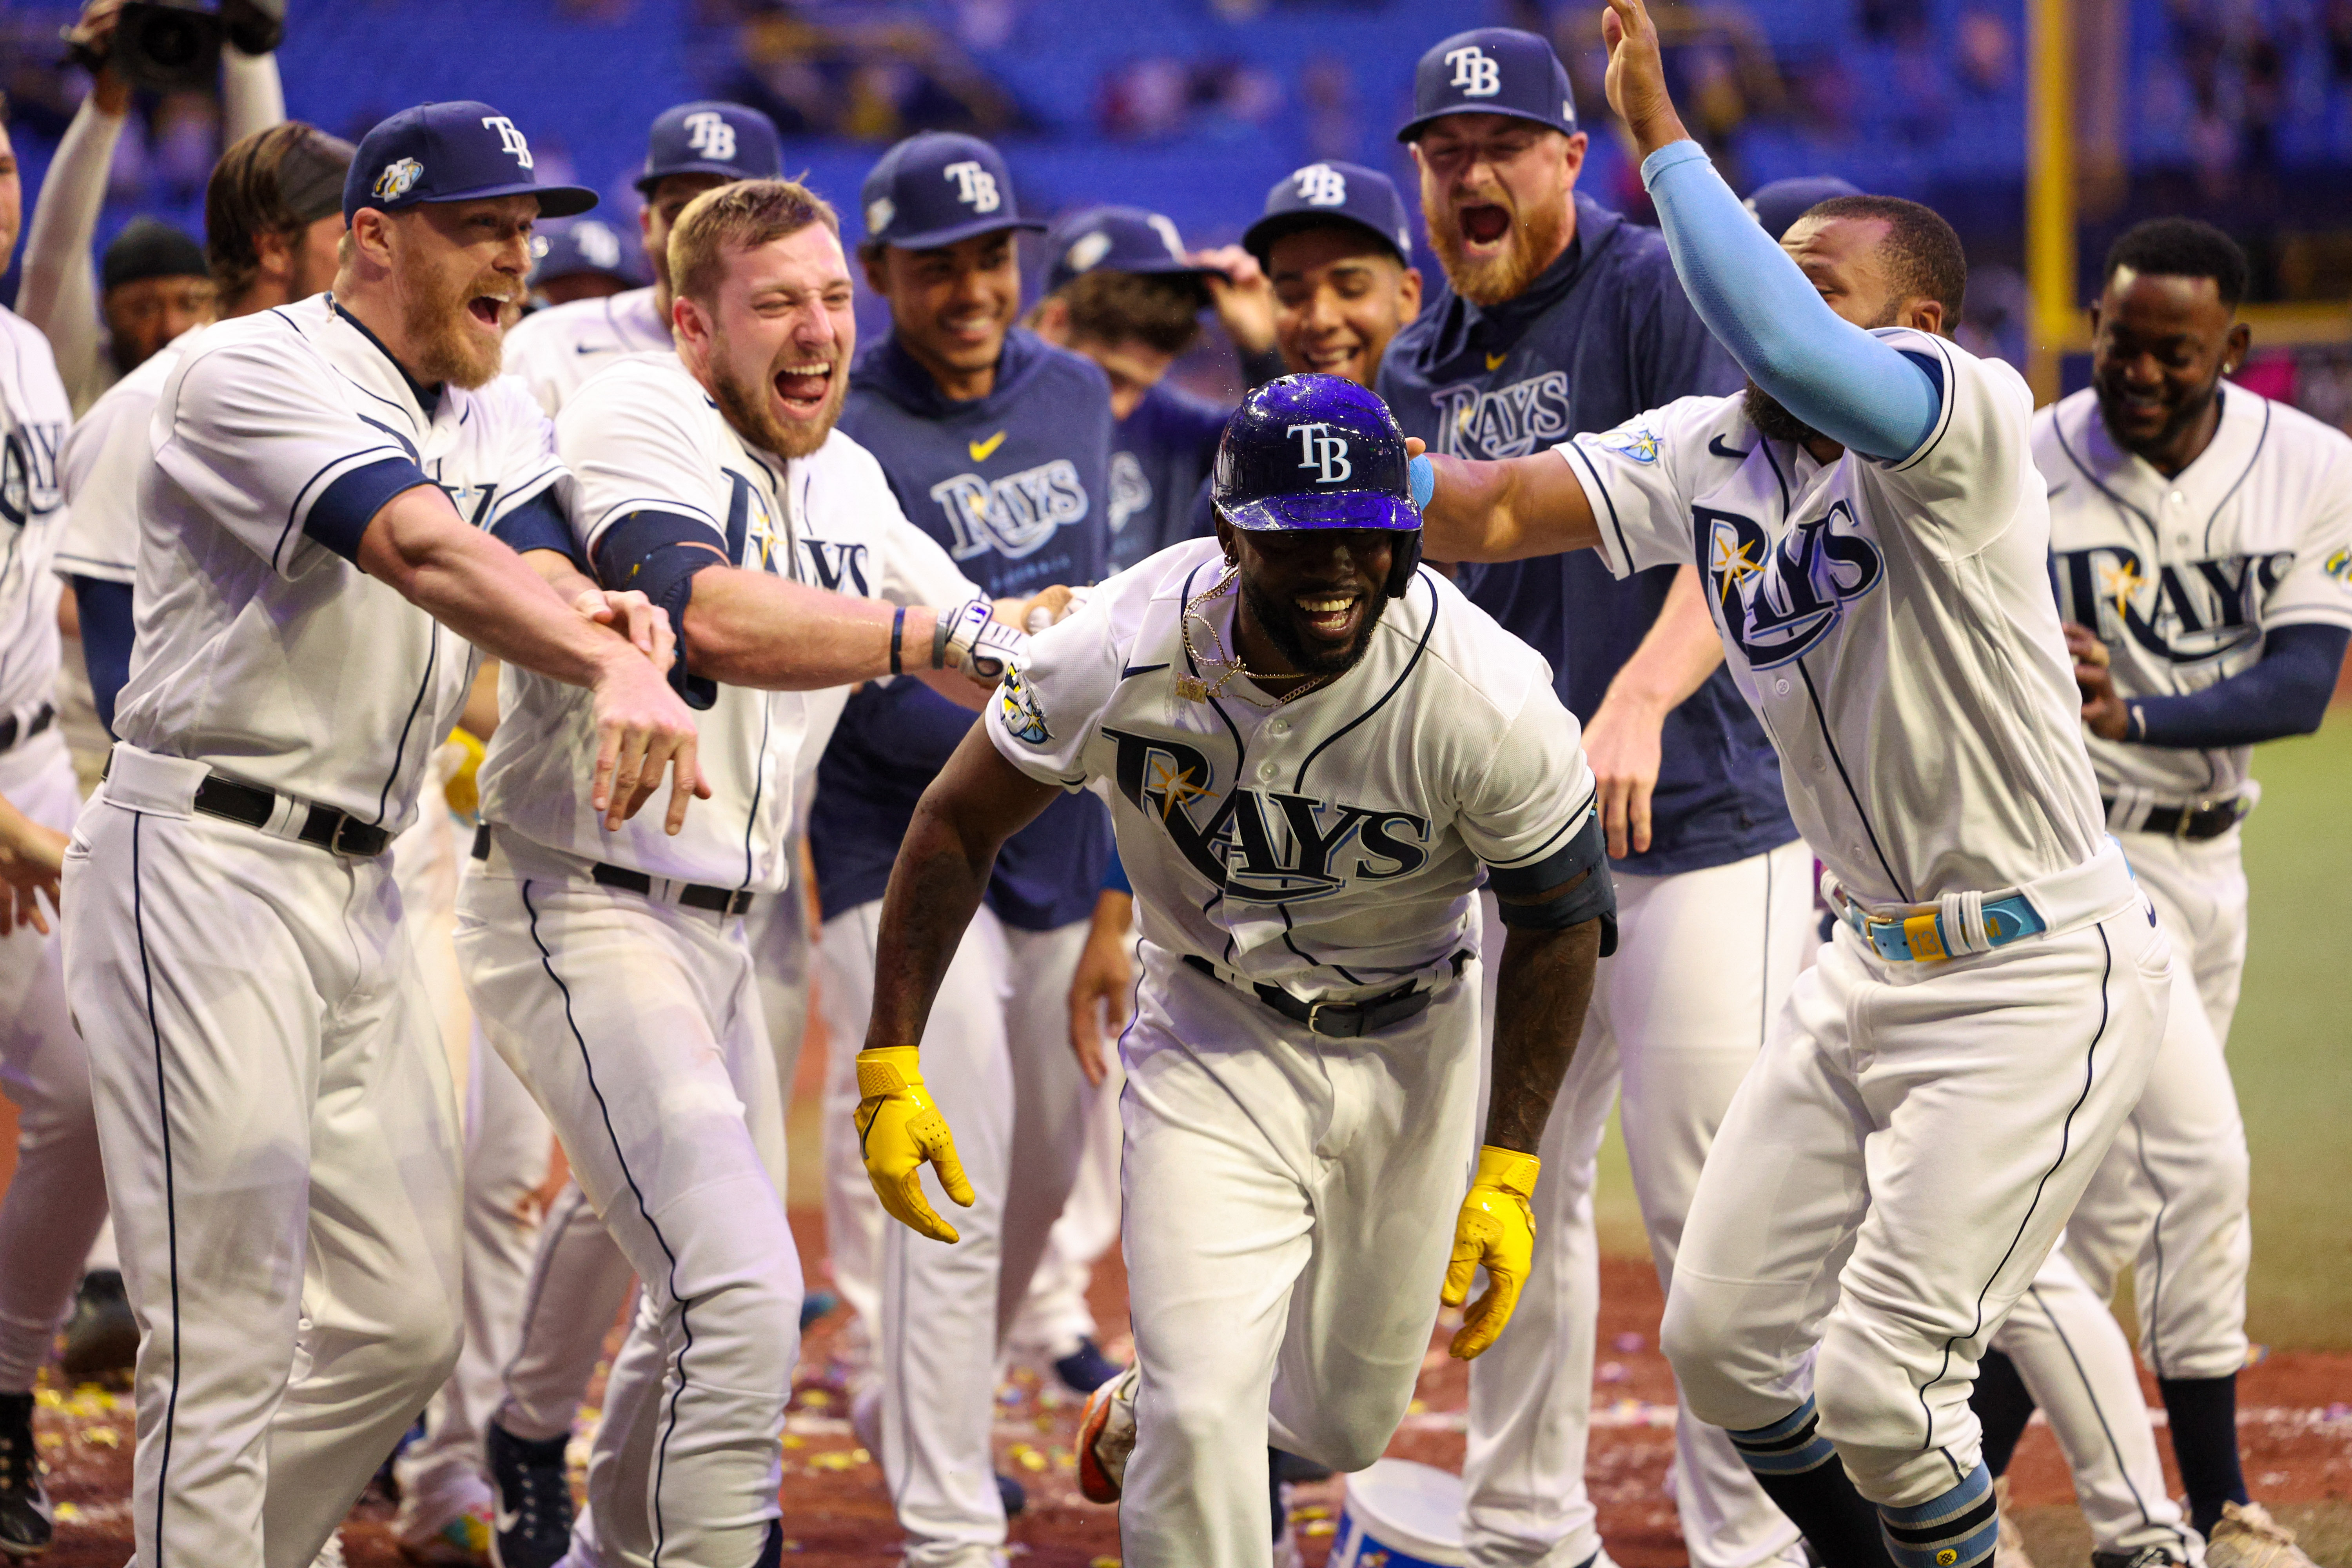 MLB roundup: Arozarena hits leadoff homer in 9th, Rays beat Twins 2-1